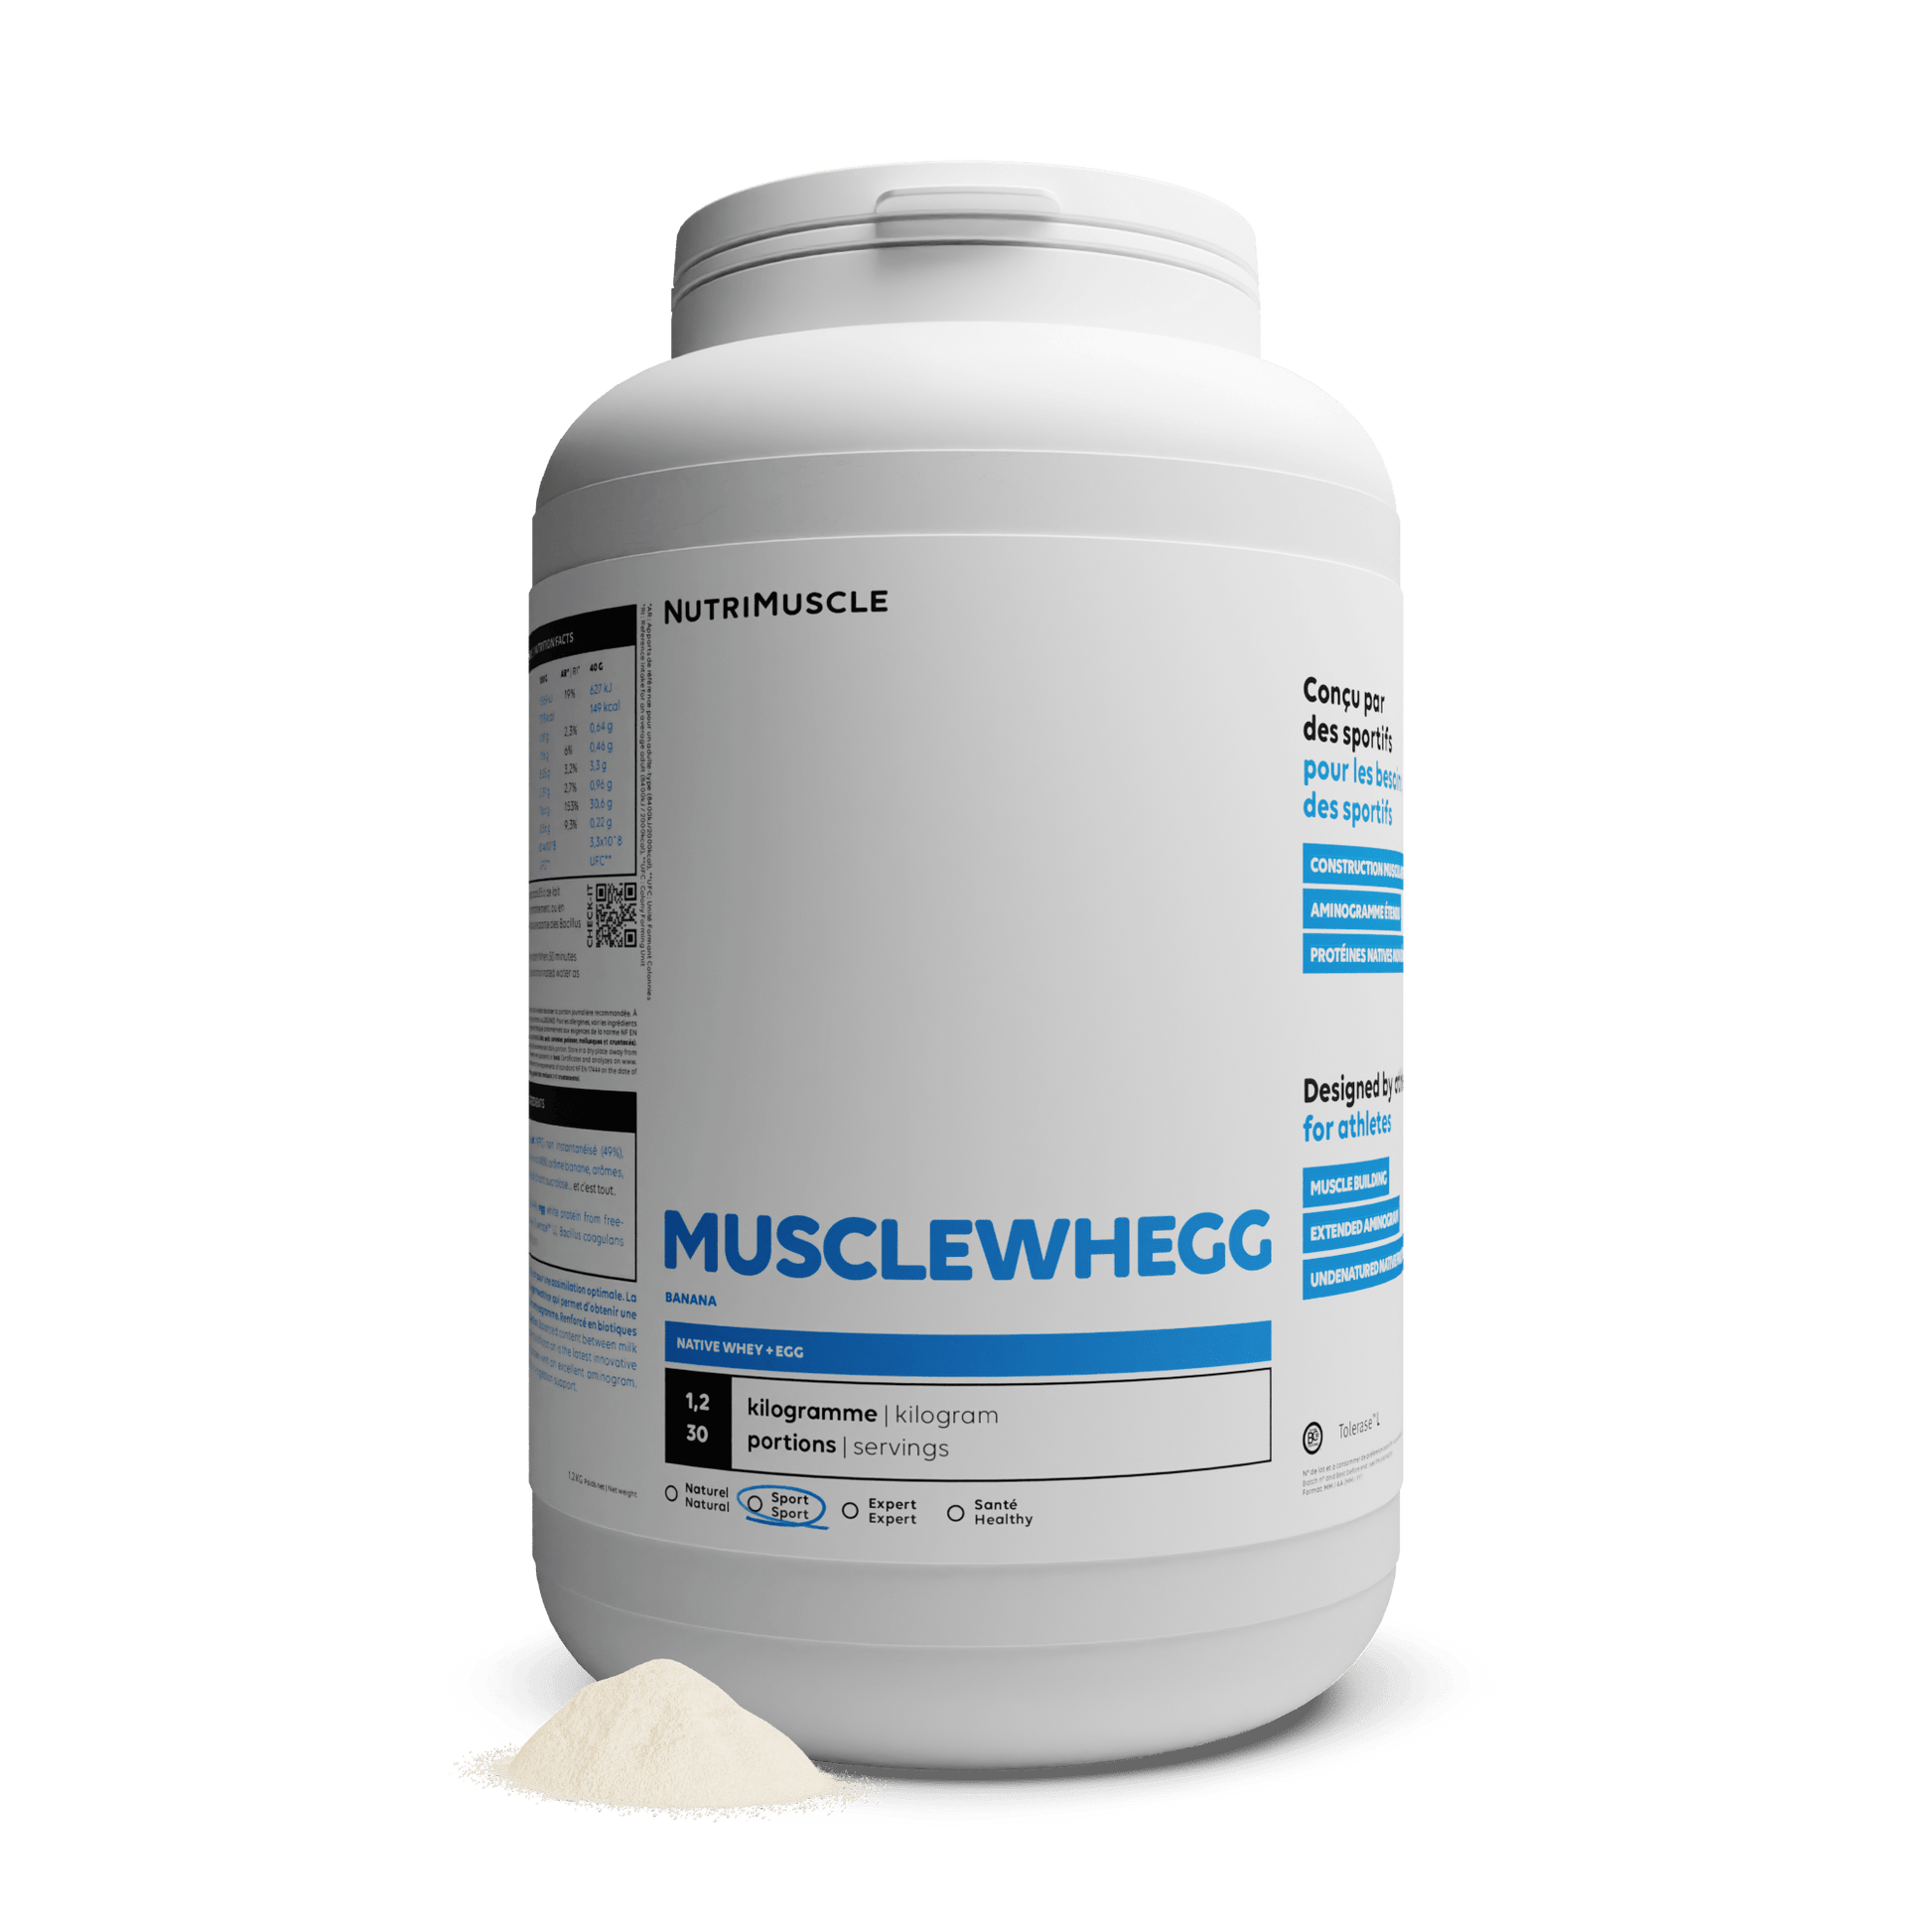 Nutrimuscle Protéines Banane / 1.20 kg Musclewhegg - Mix Protein